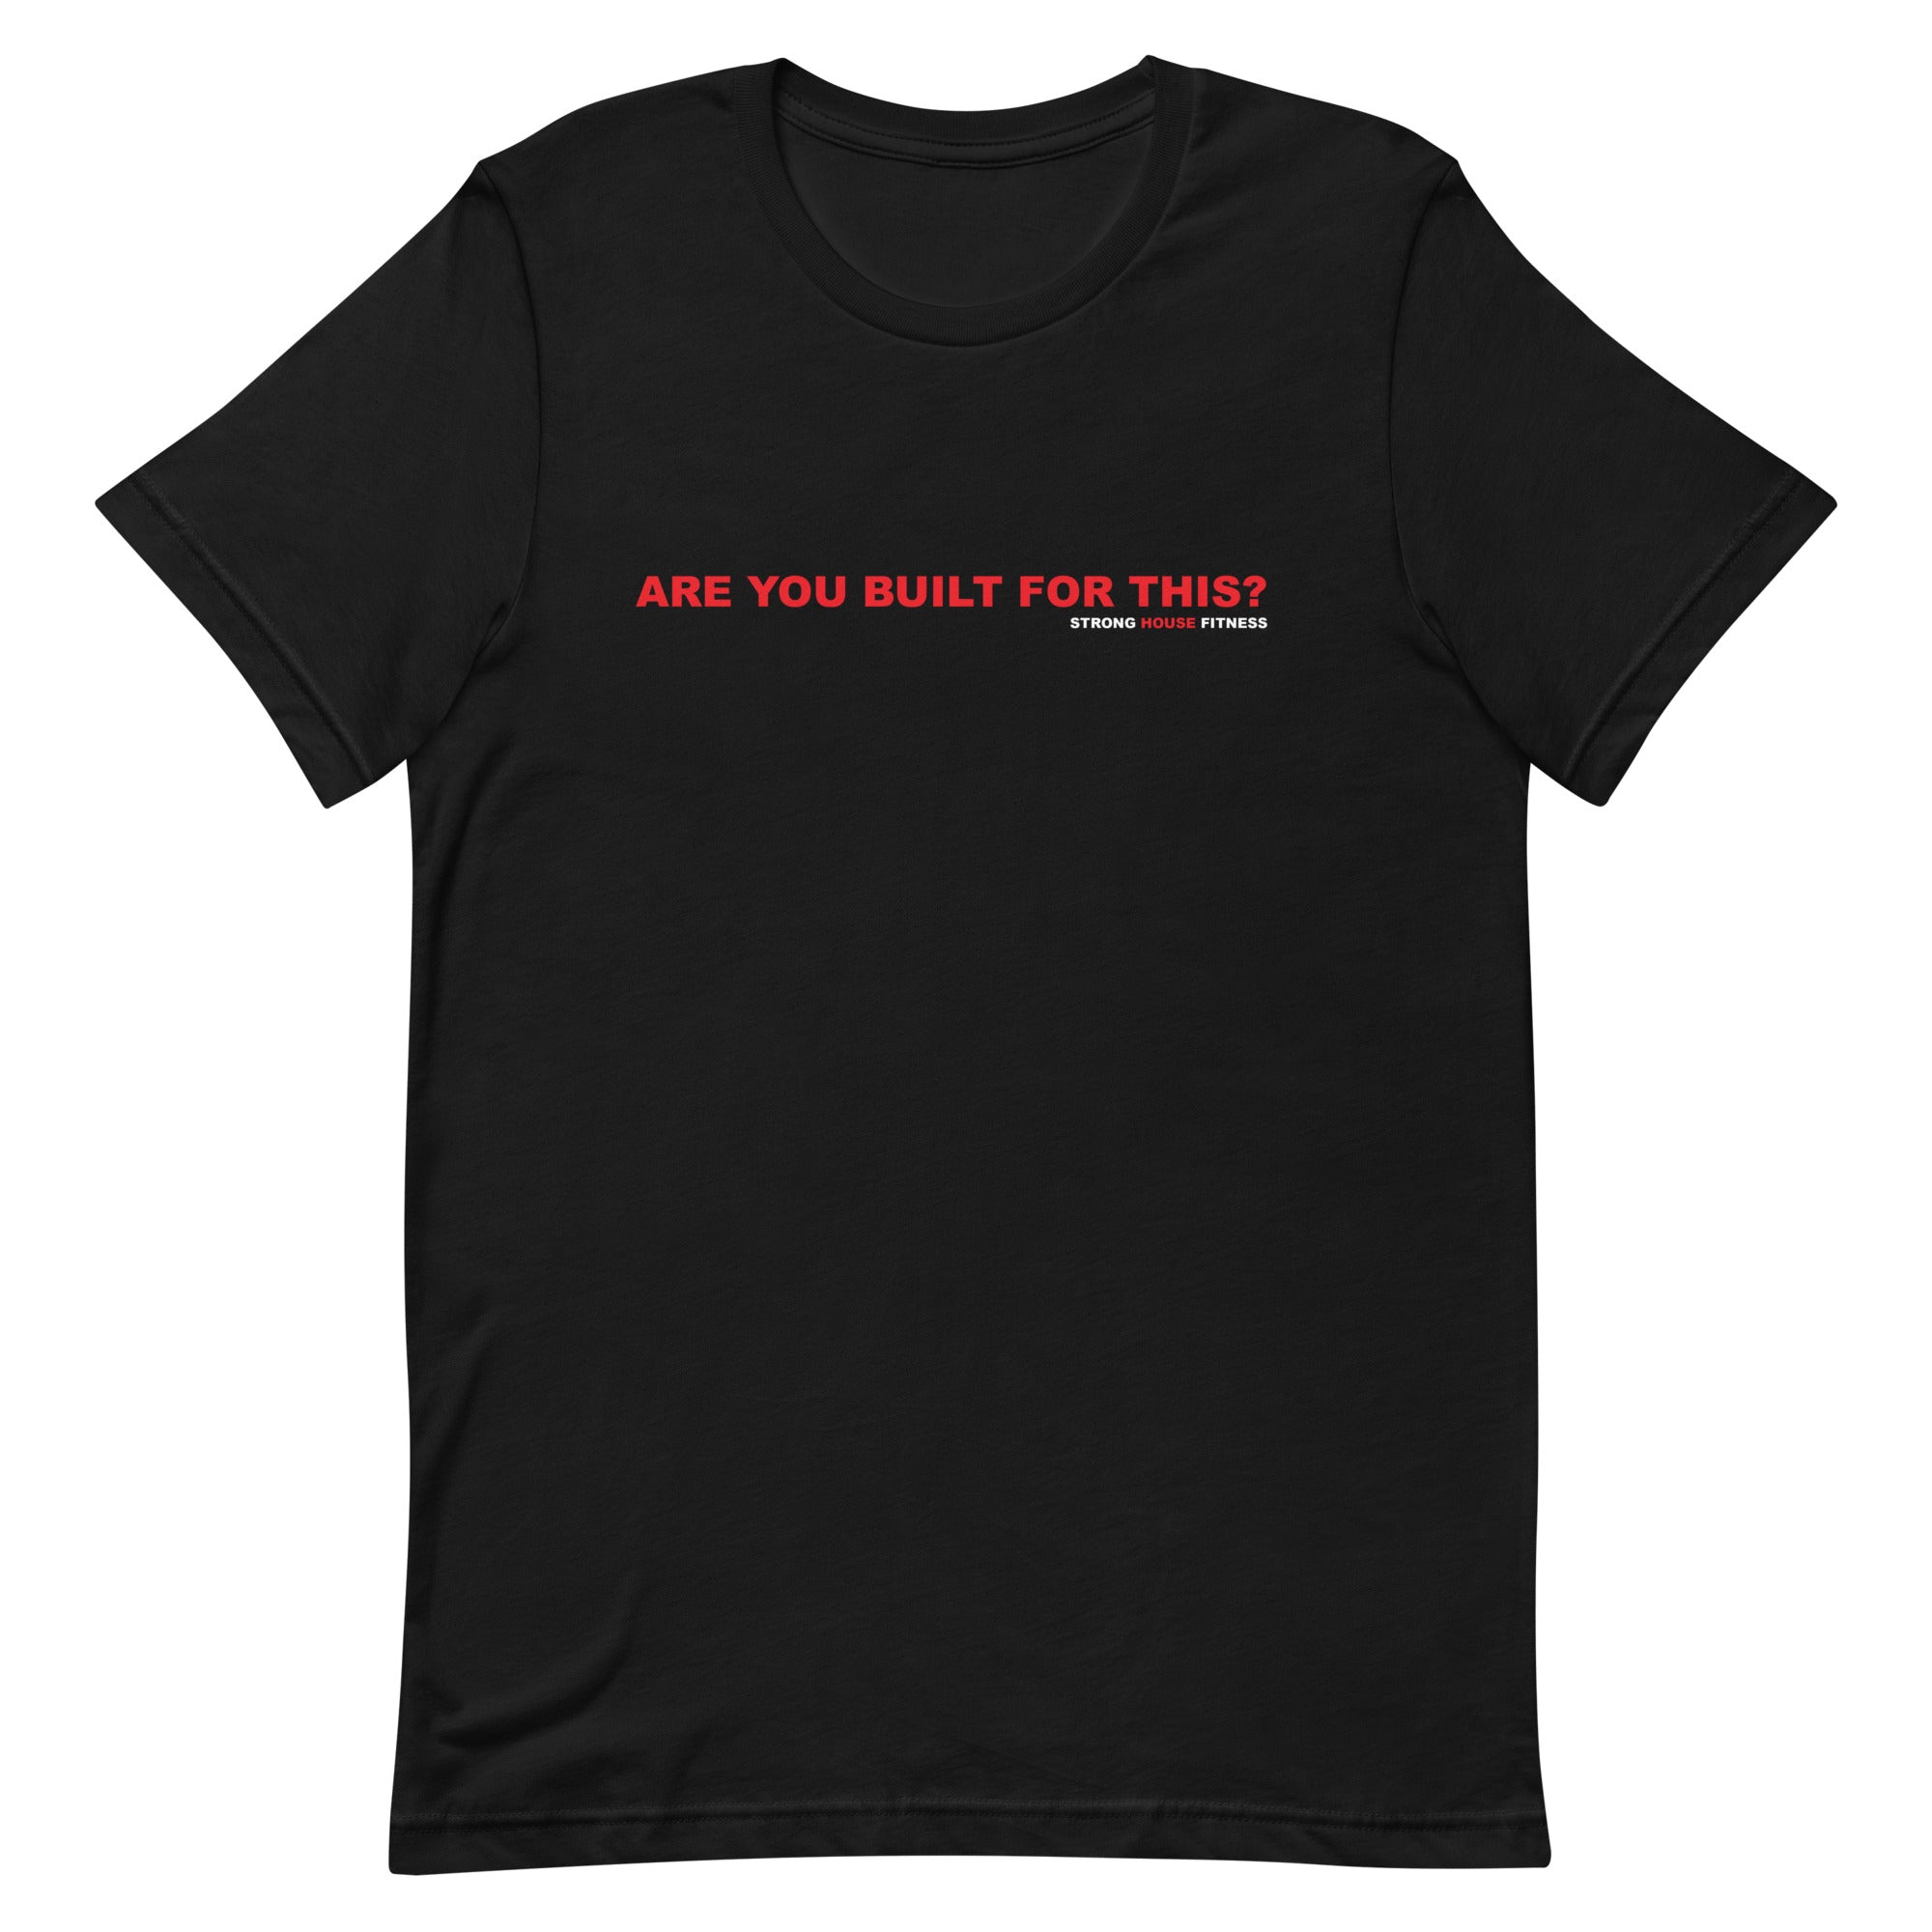 ARE YOU BUILT FOR THIS? Unisex t-shirt